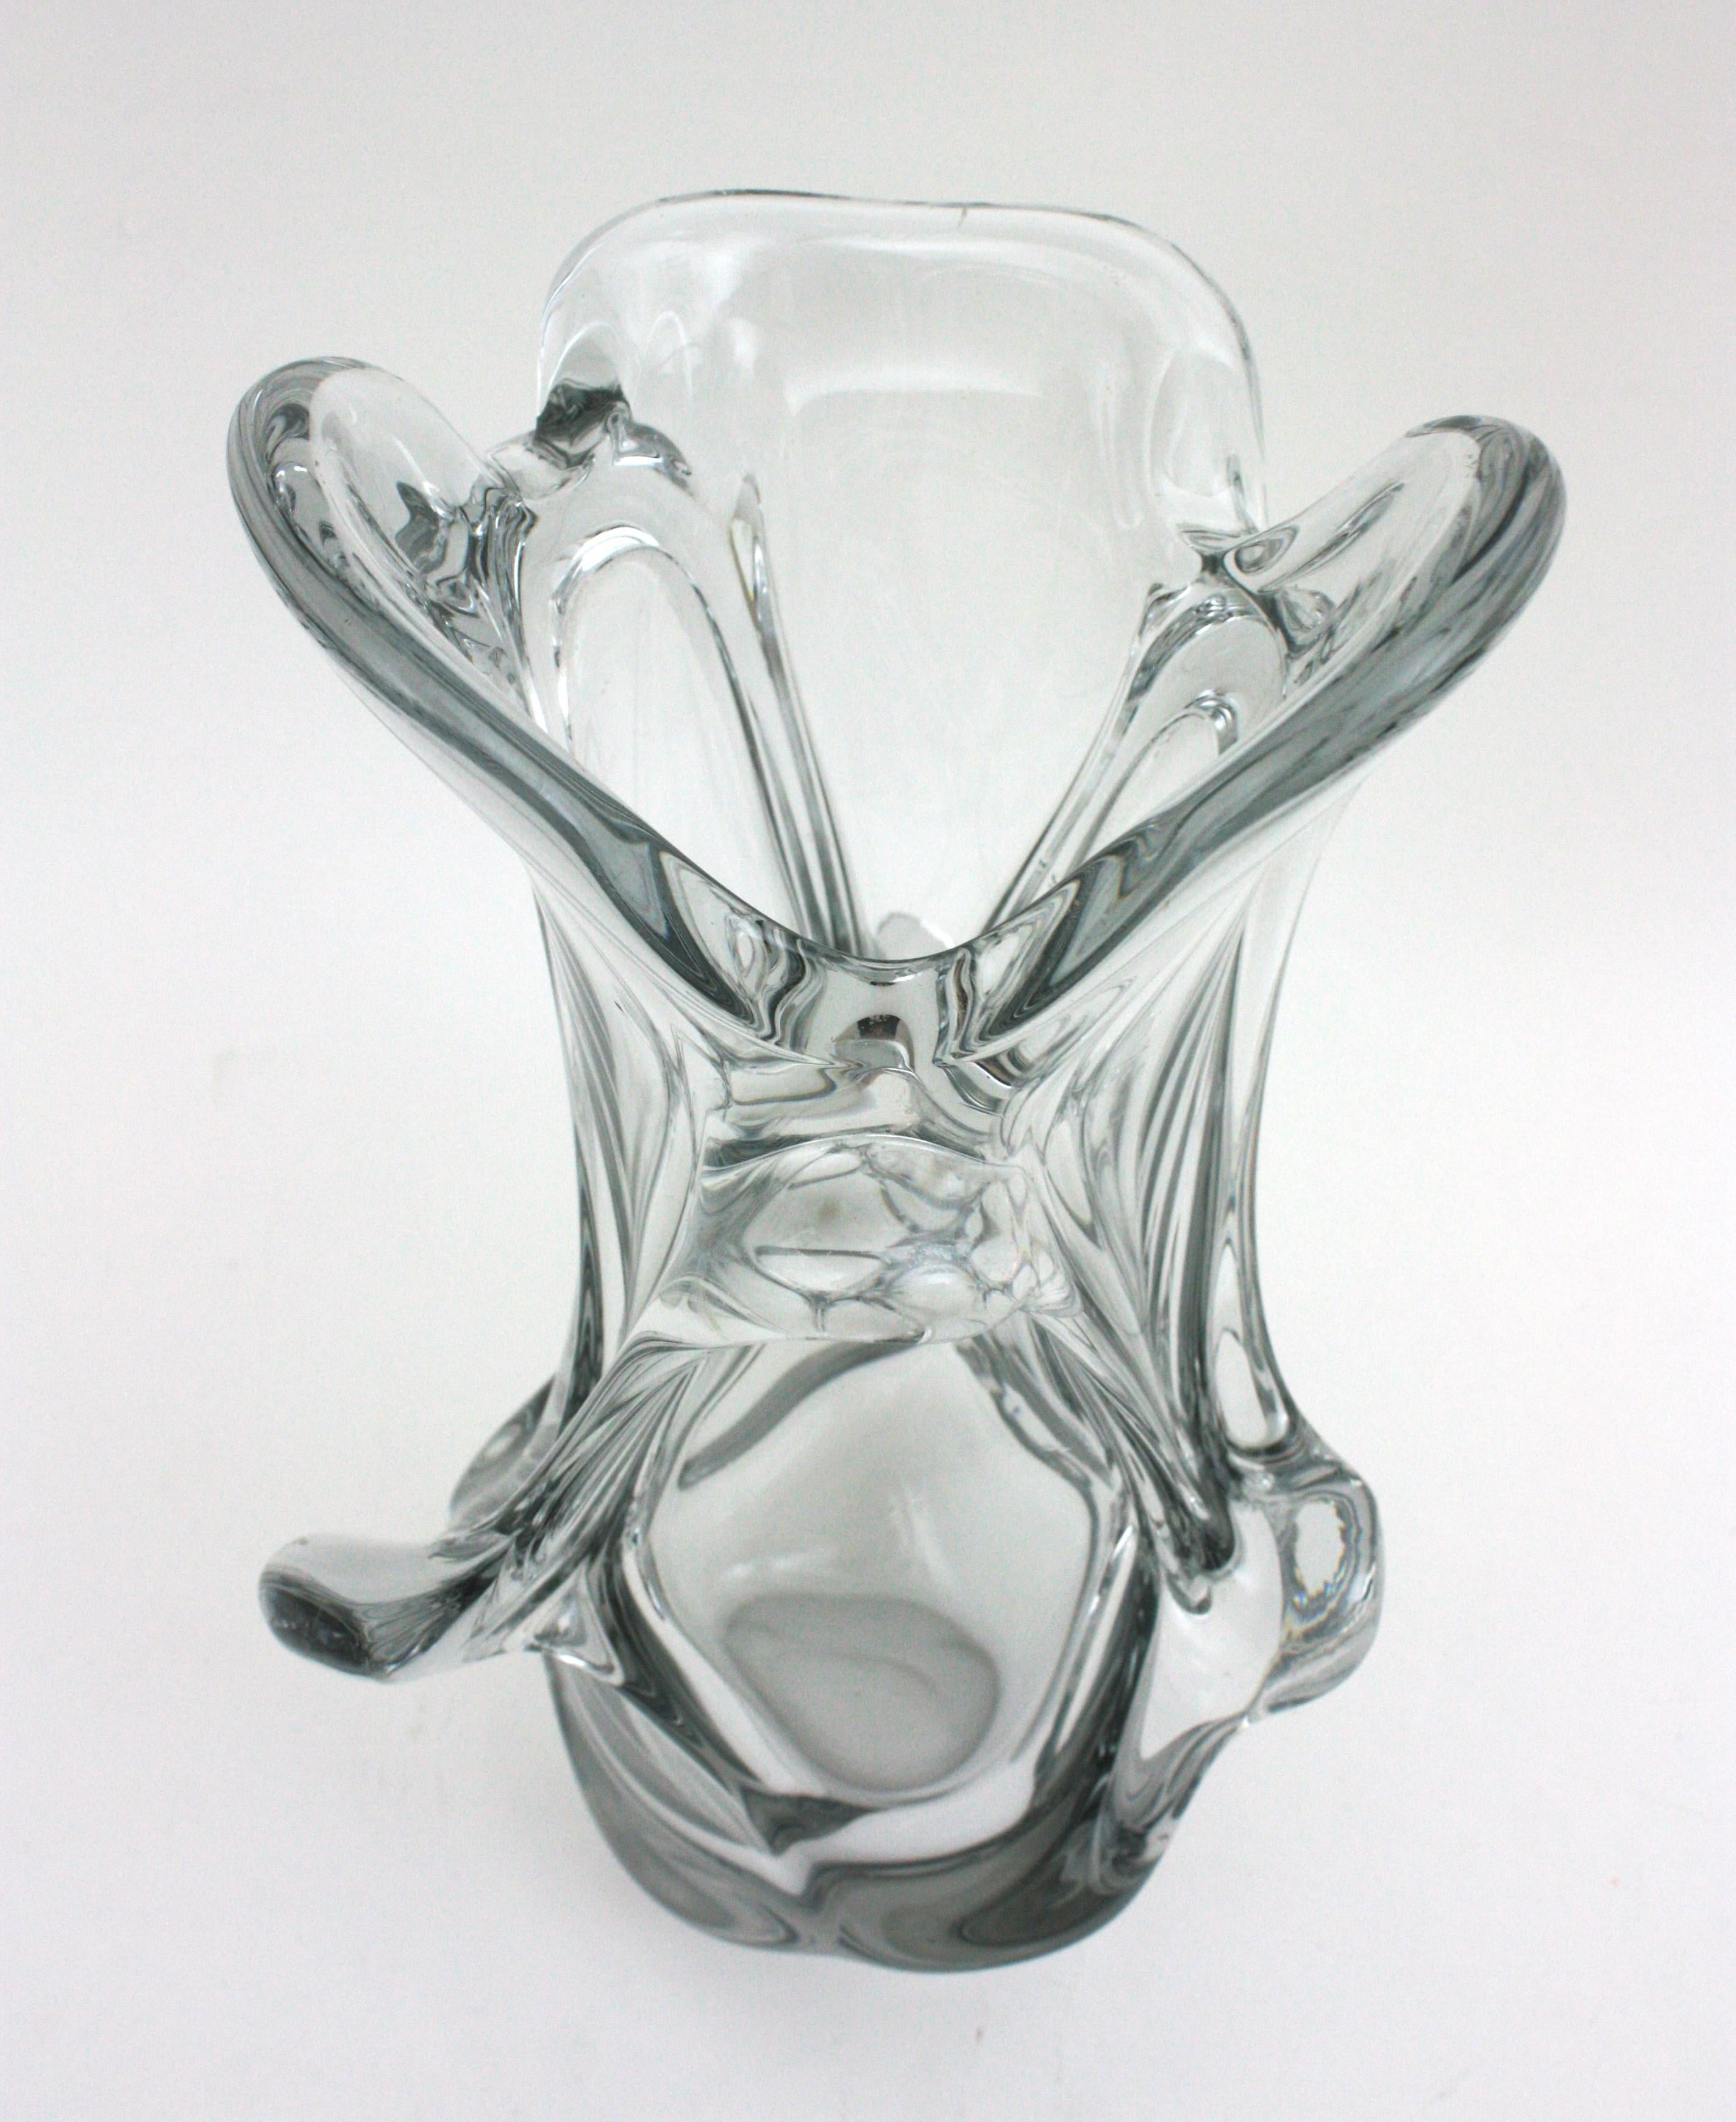 Large Murano Organic Shaped Vase in Clear Glass, 1950s For Sale 10